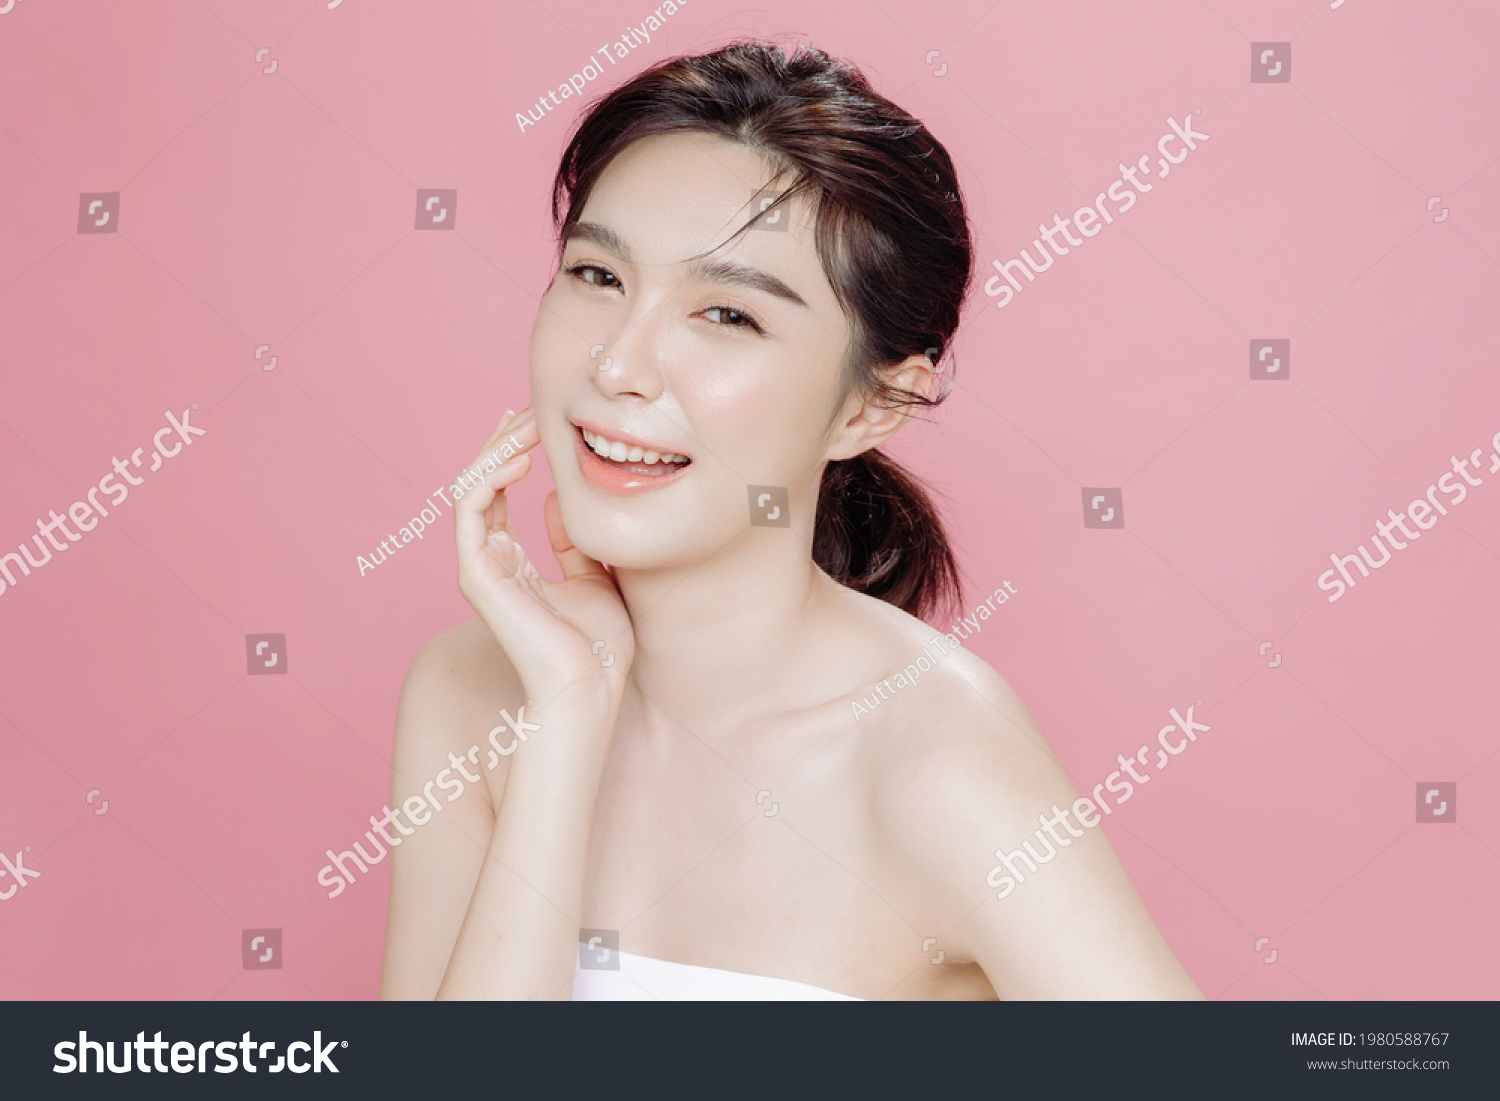 Asian woman has a lovely face is feeling happy with her perfect skin touch her face. She wears a white strapless bra. isolated over pink background. Skincare, cosmetology and plastic surgery concept. #1980588767